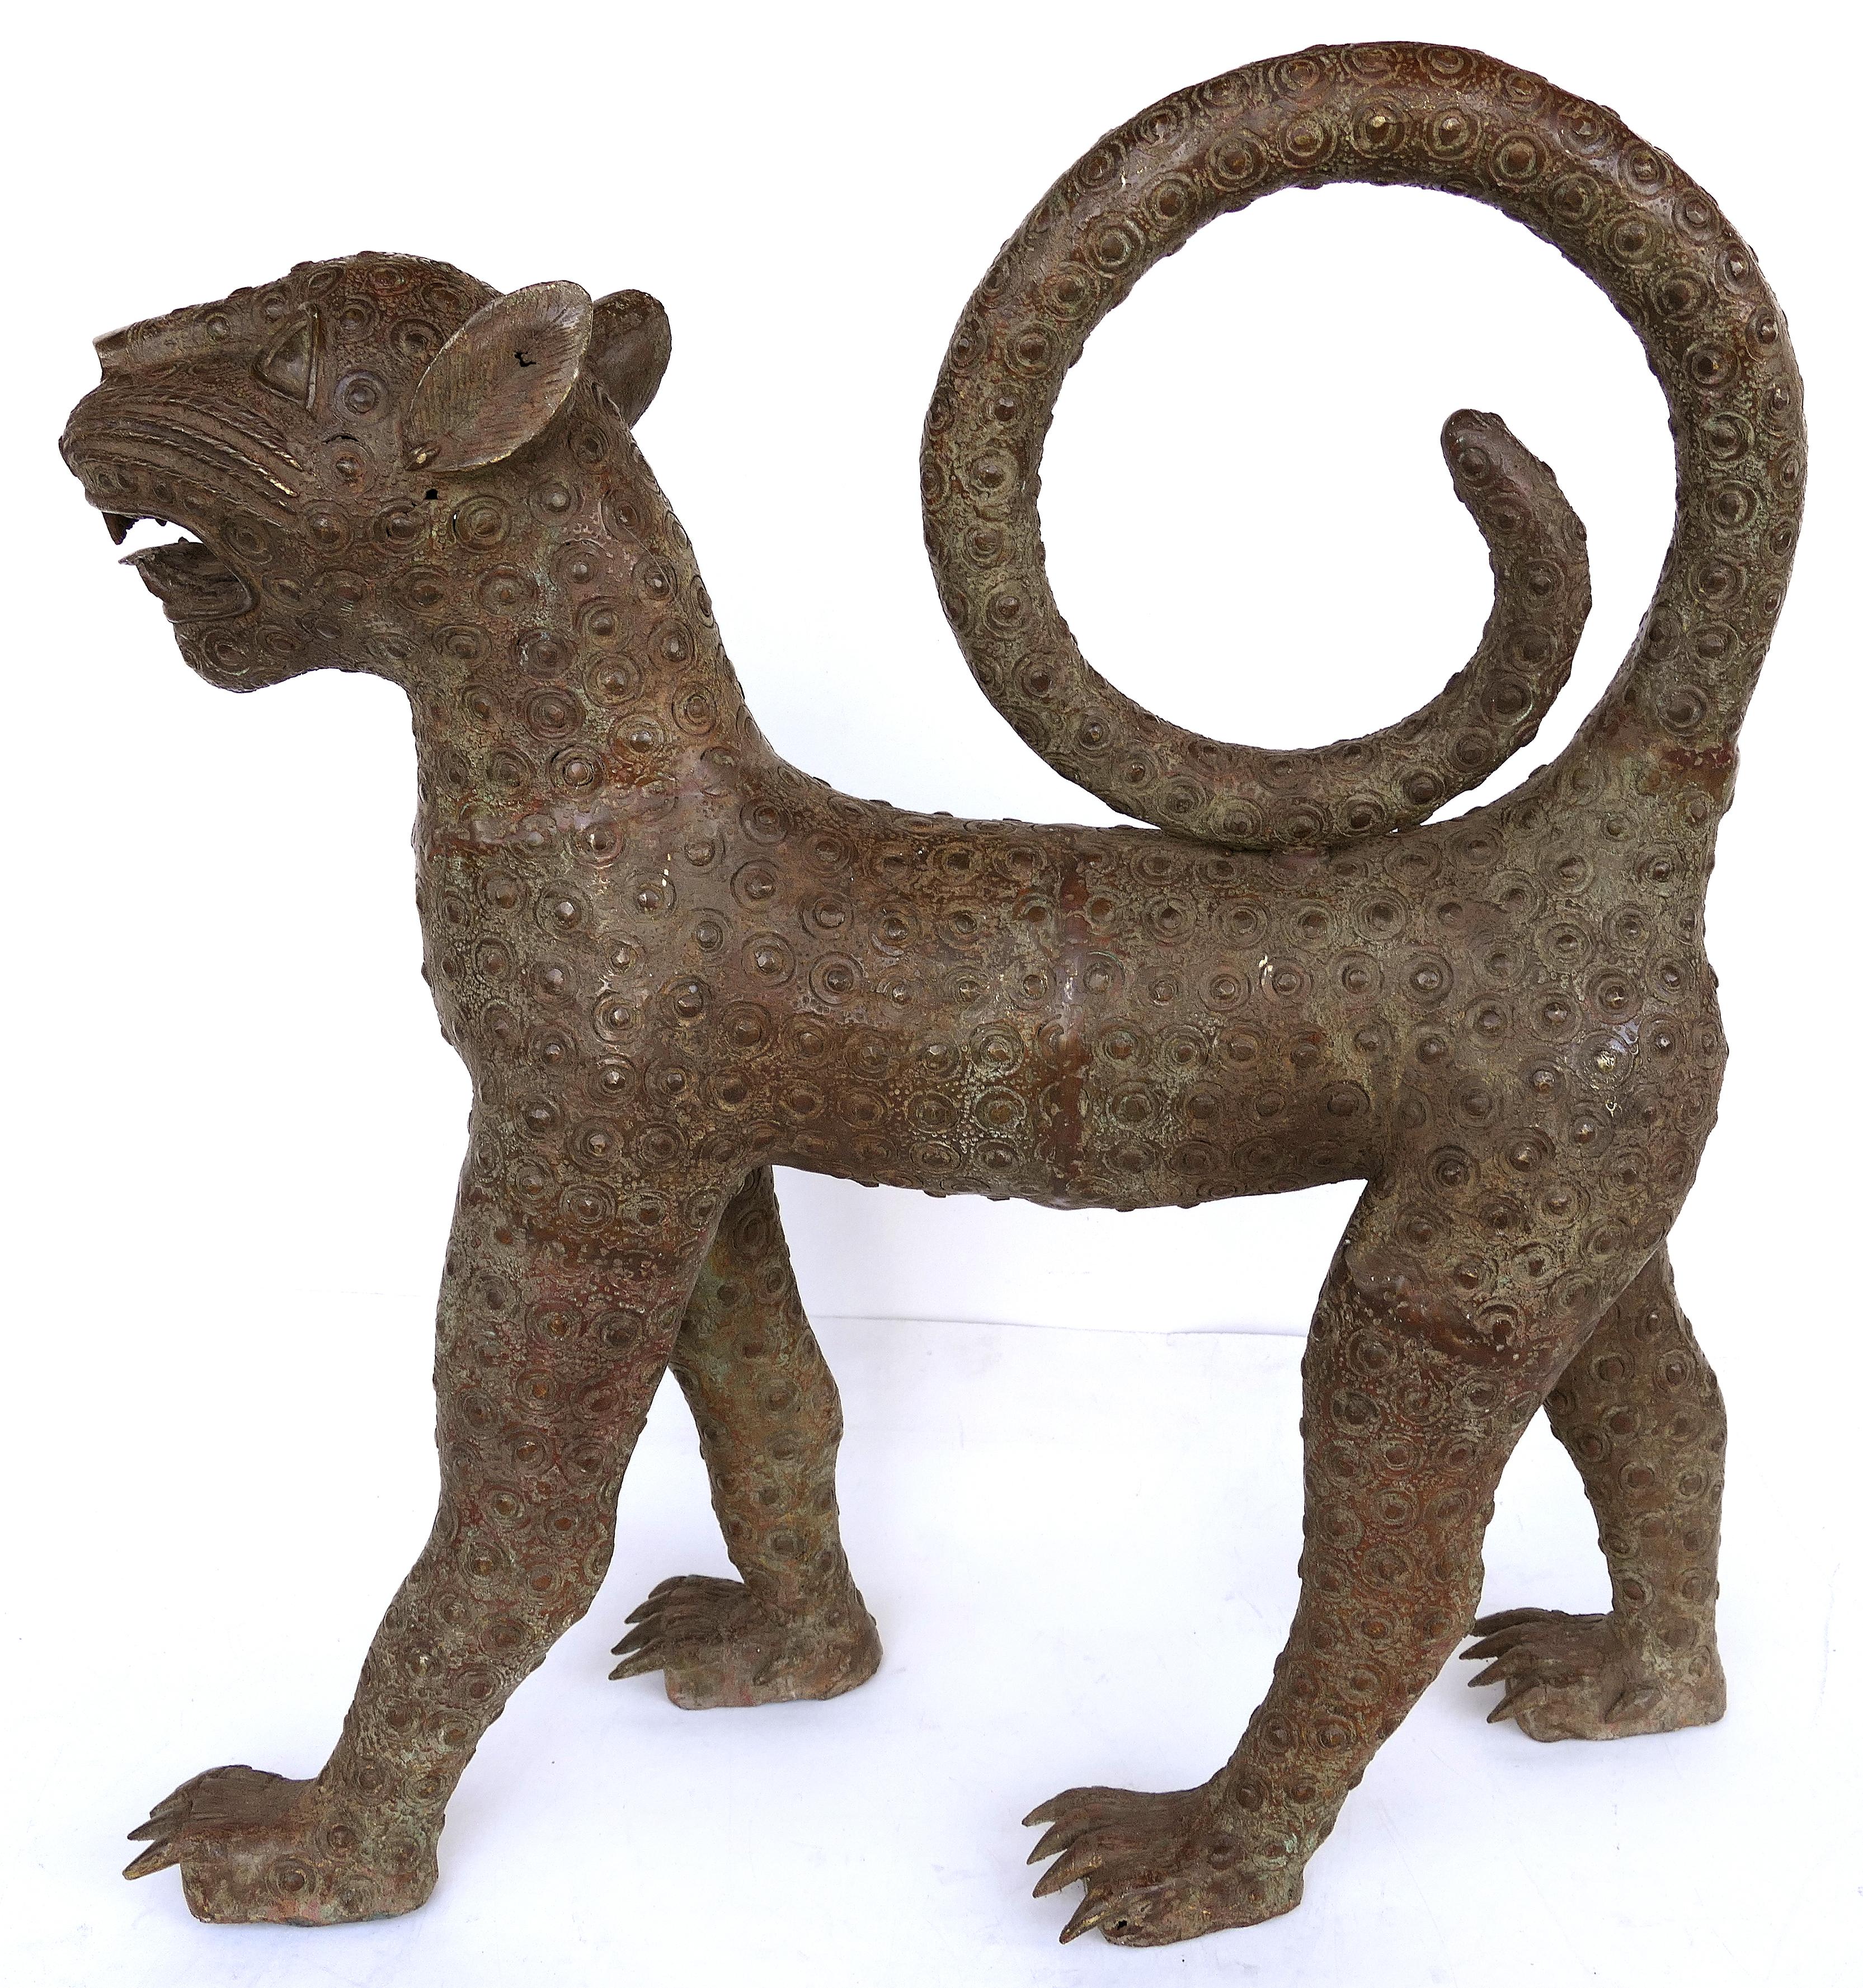 Benin (Nigeria) bronze sculptures of leopards from the mid-20th century

Offered for sale is a pair of modern mid-20th century copies of Benin (modern-day Nigeria) bronze figural sculptures of leopards. This large and impressive pair of leopards